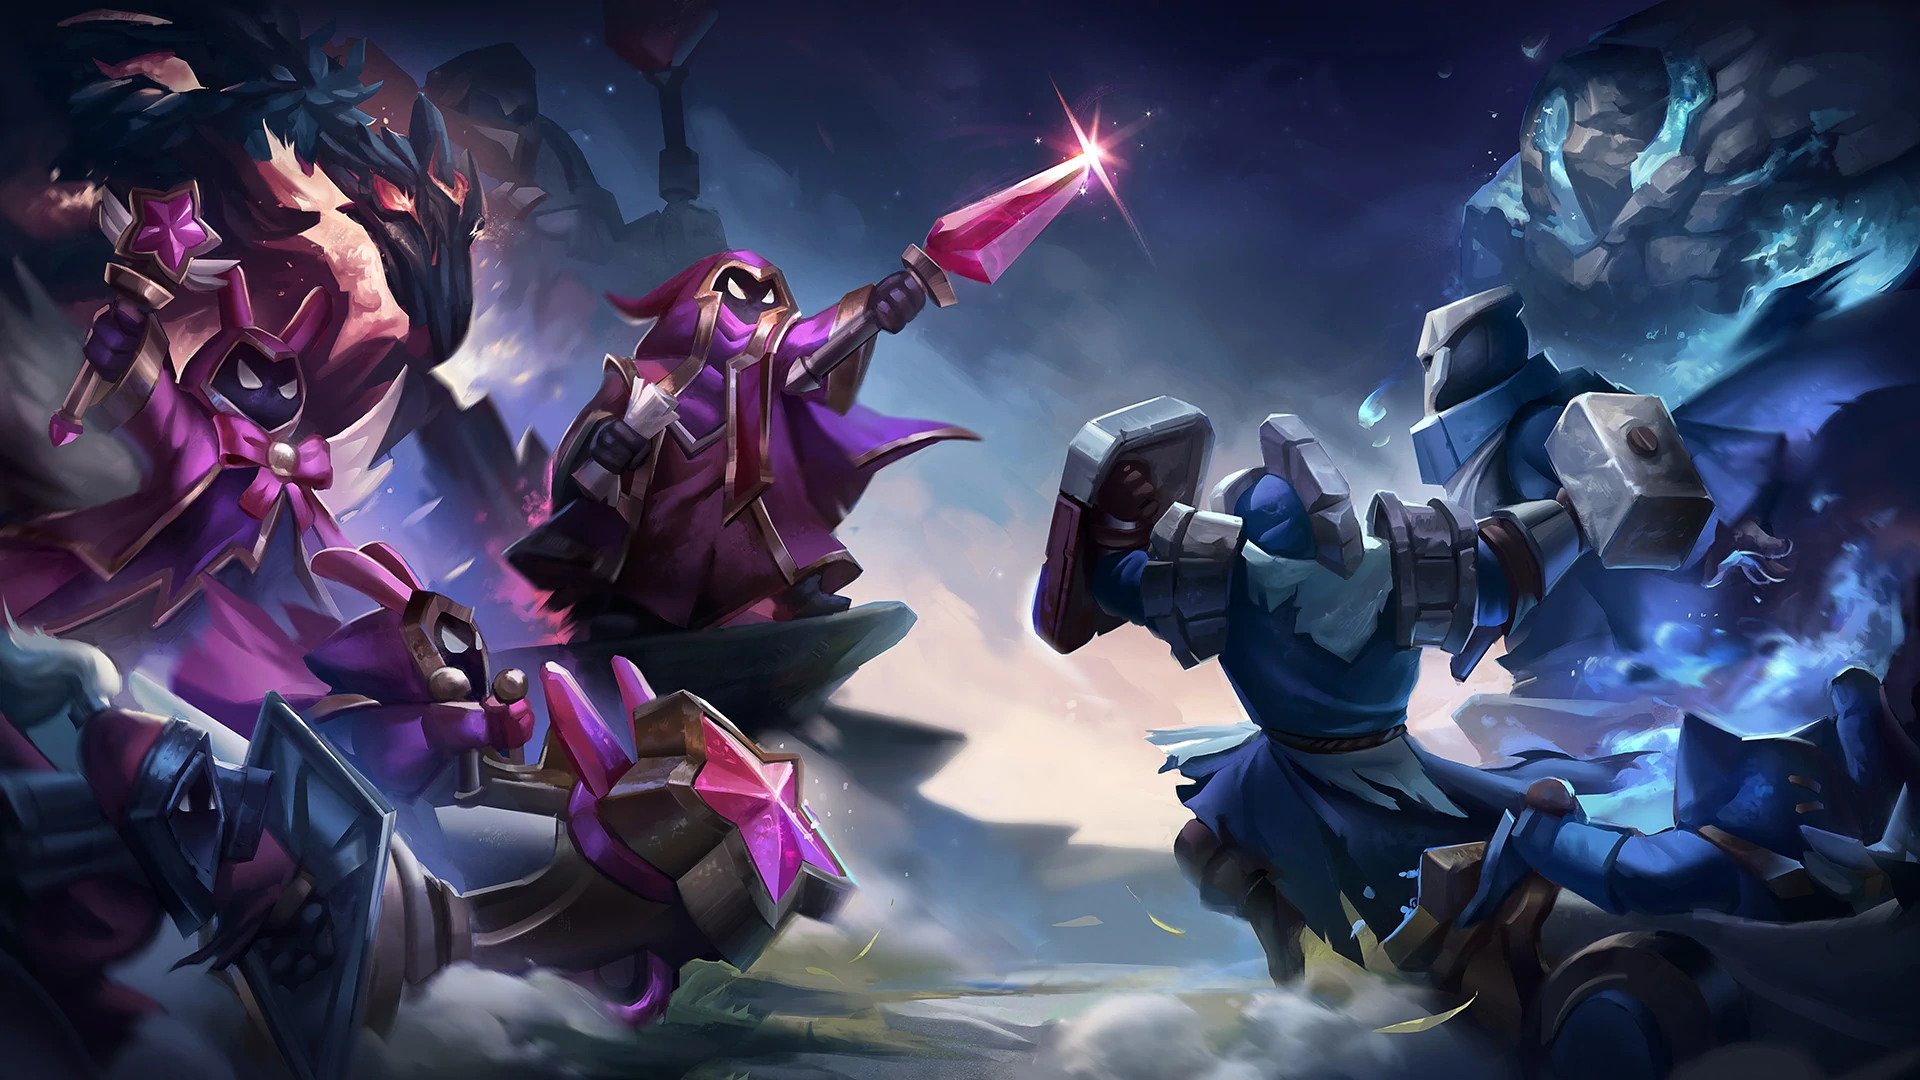 League Of Legends Is The World's Most Played Game With 32 Million+ Players  - GameRevolution